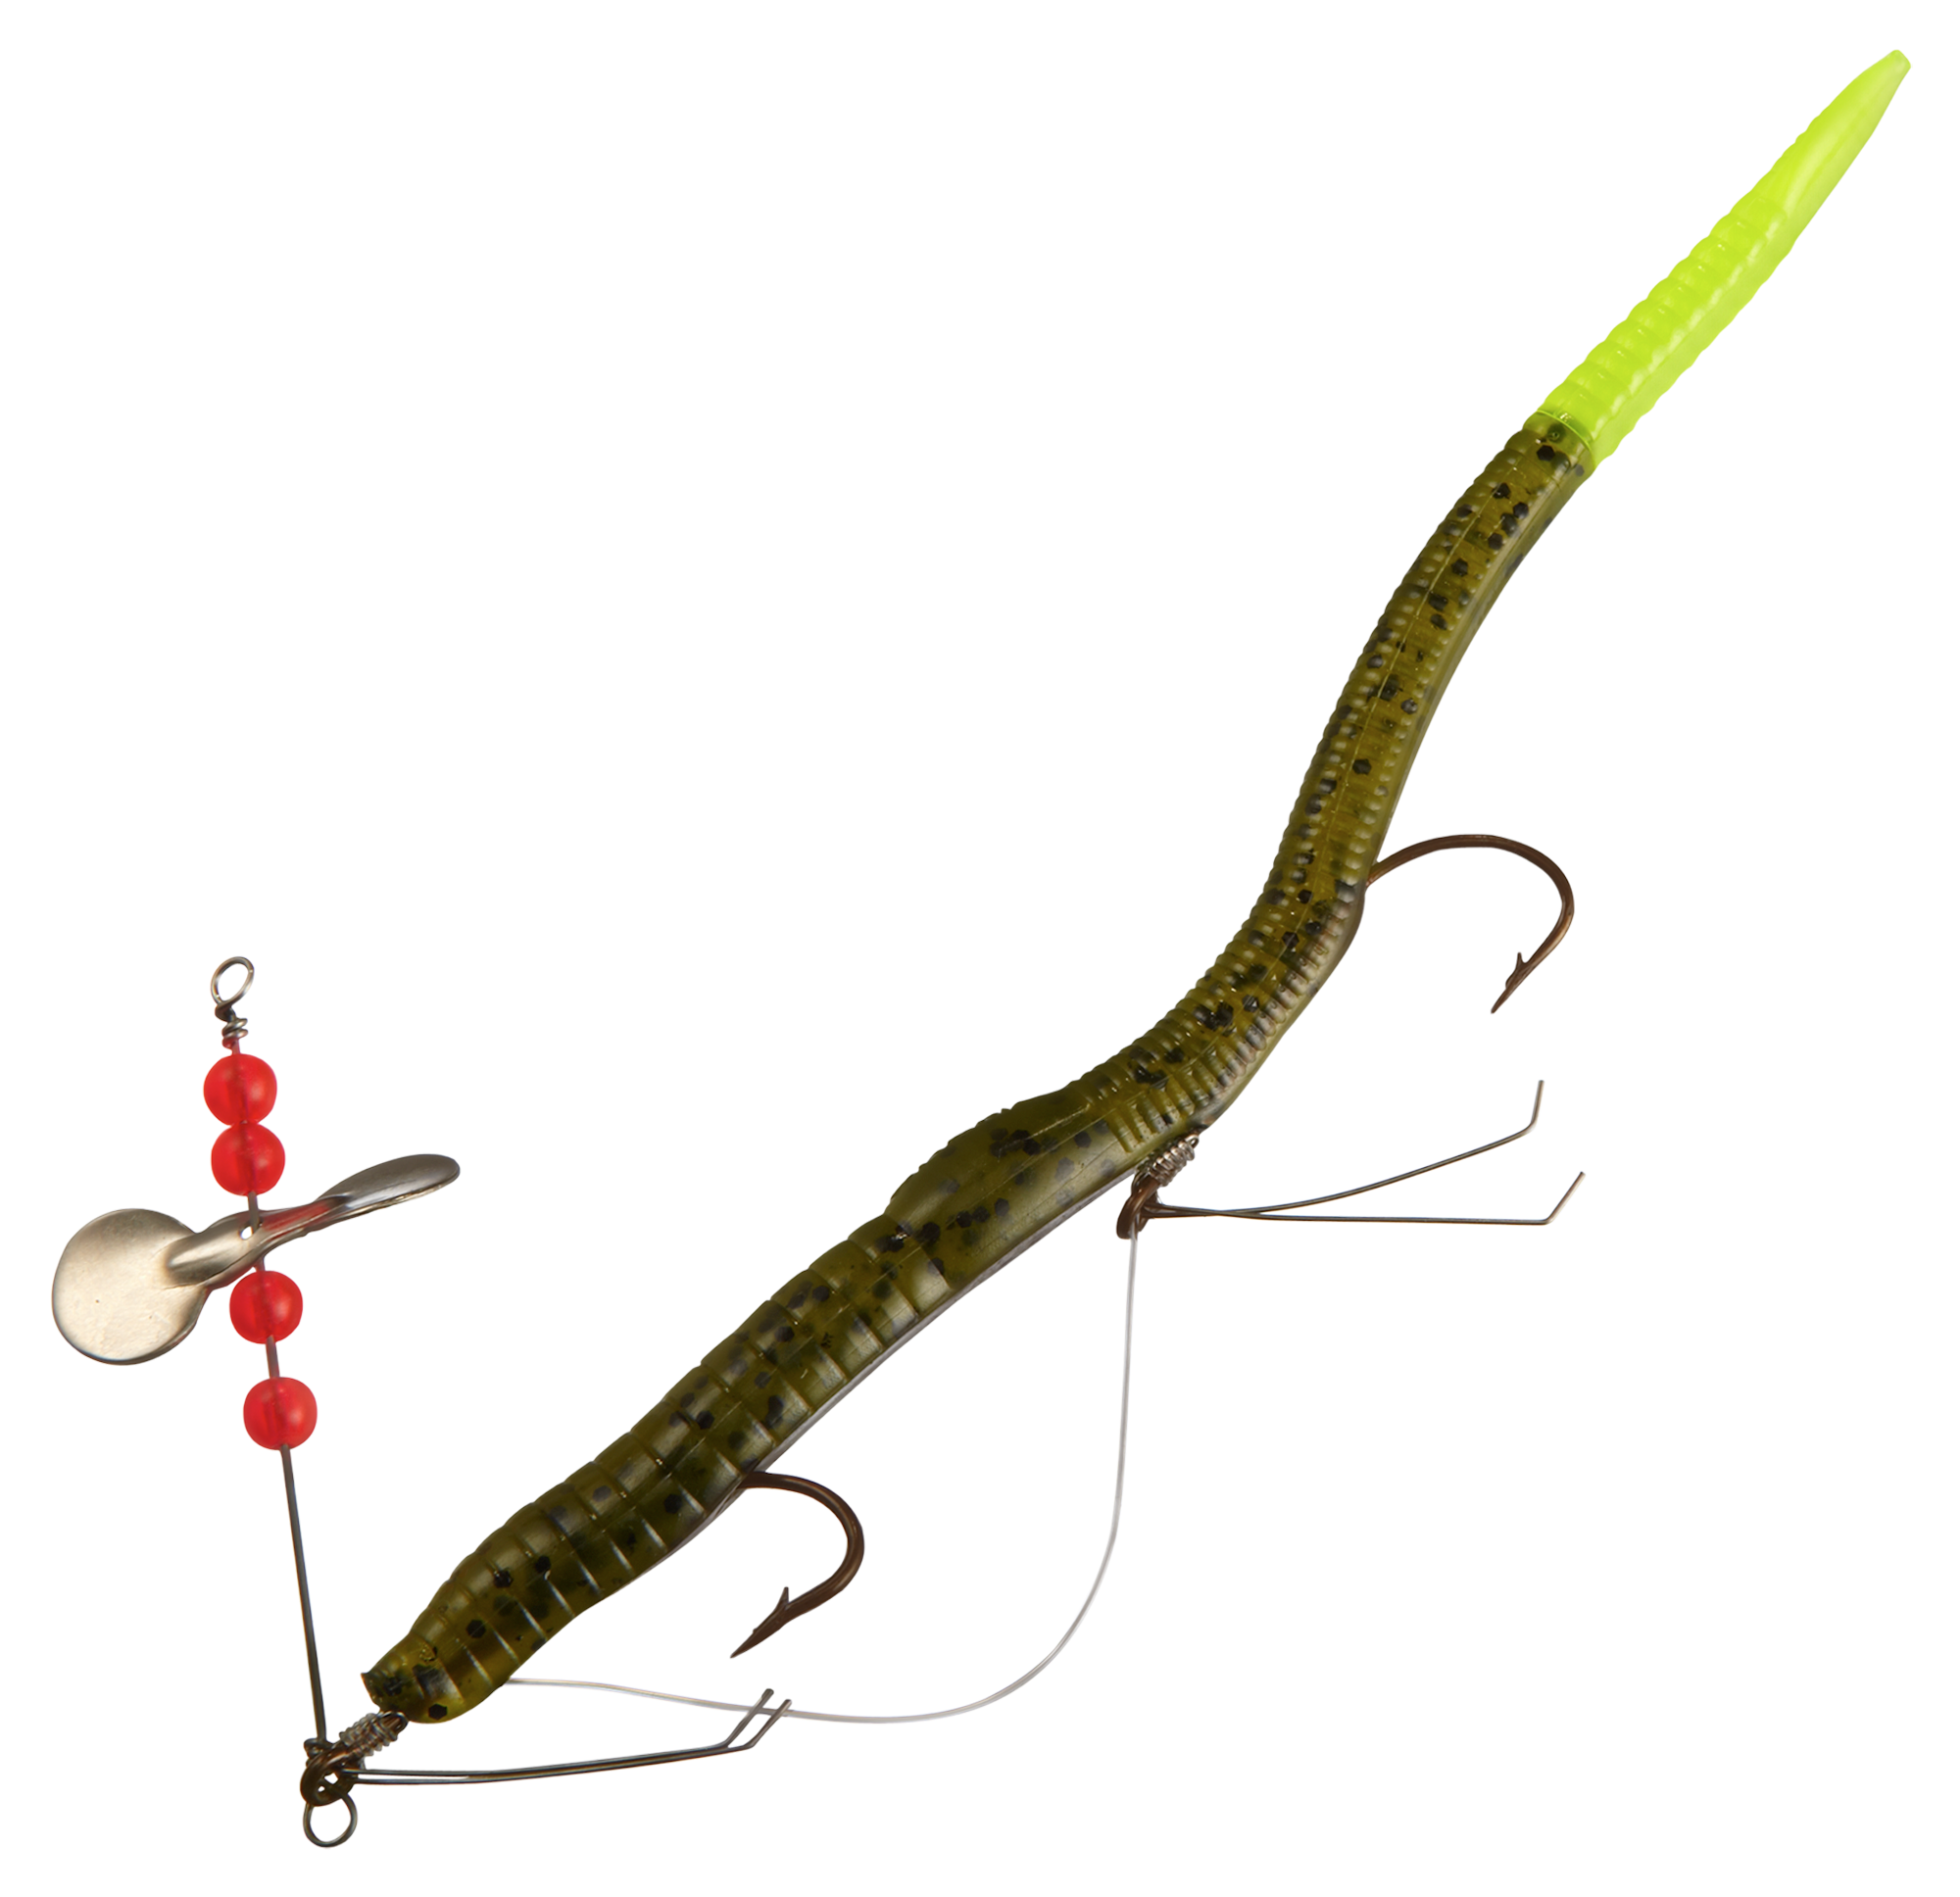 Creme Rigged Scoundrel Worm - Watermelon Chartreuse Tail